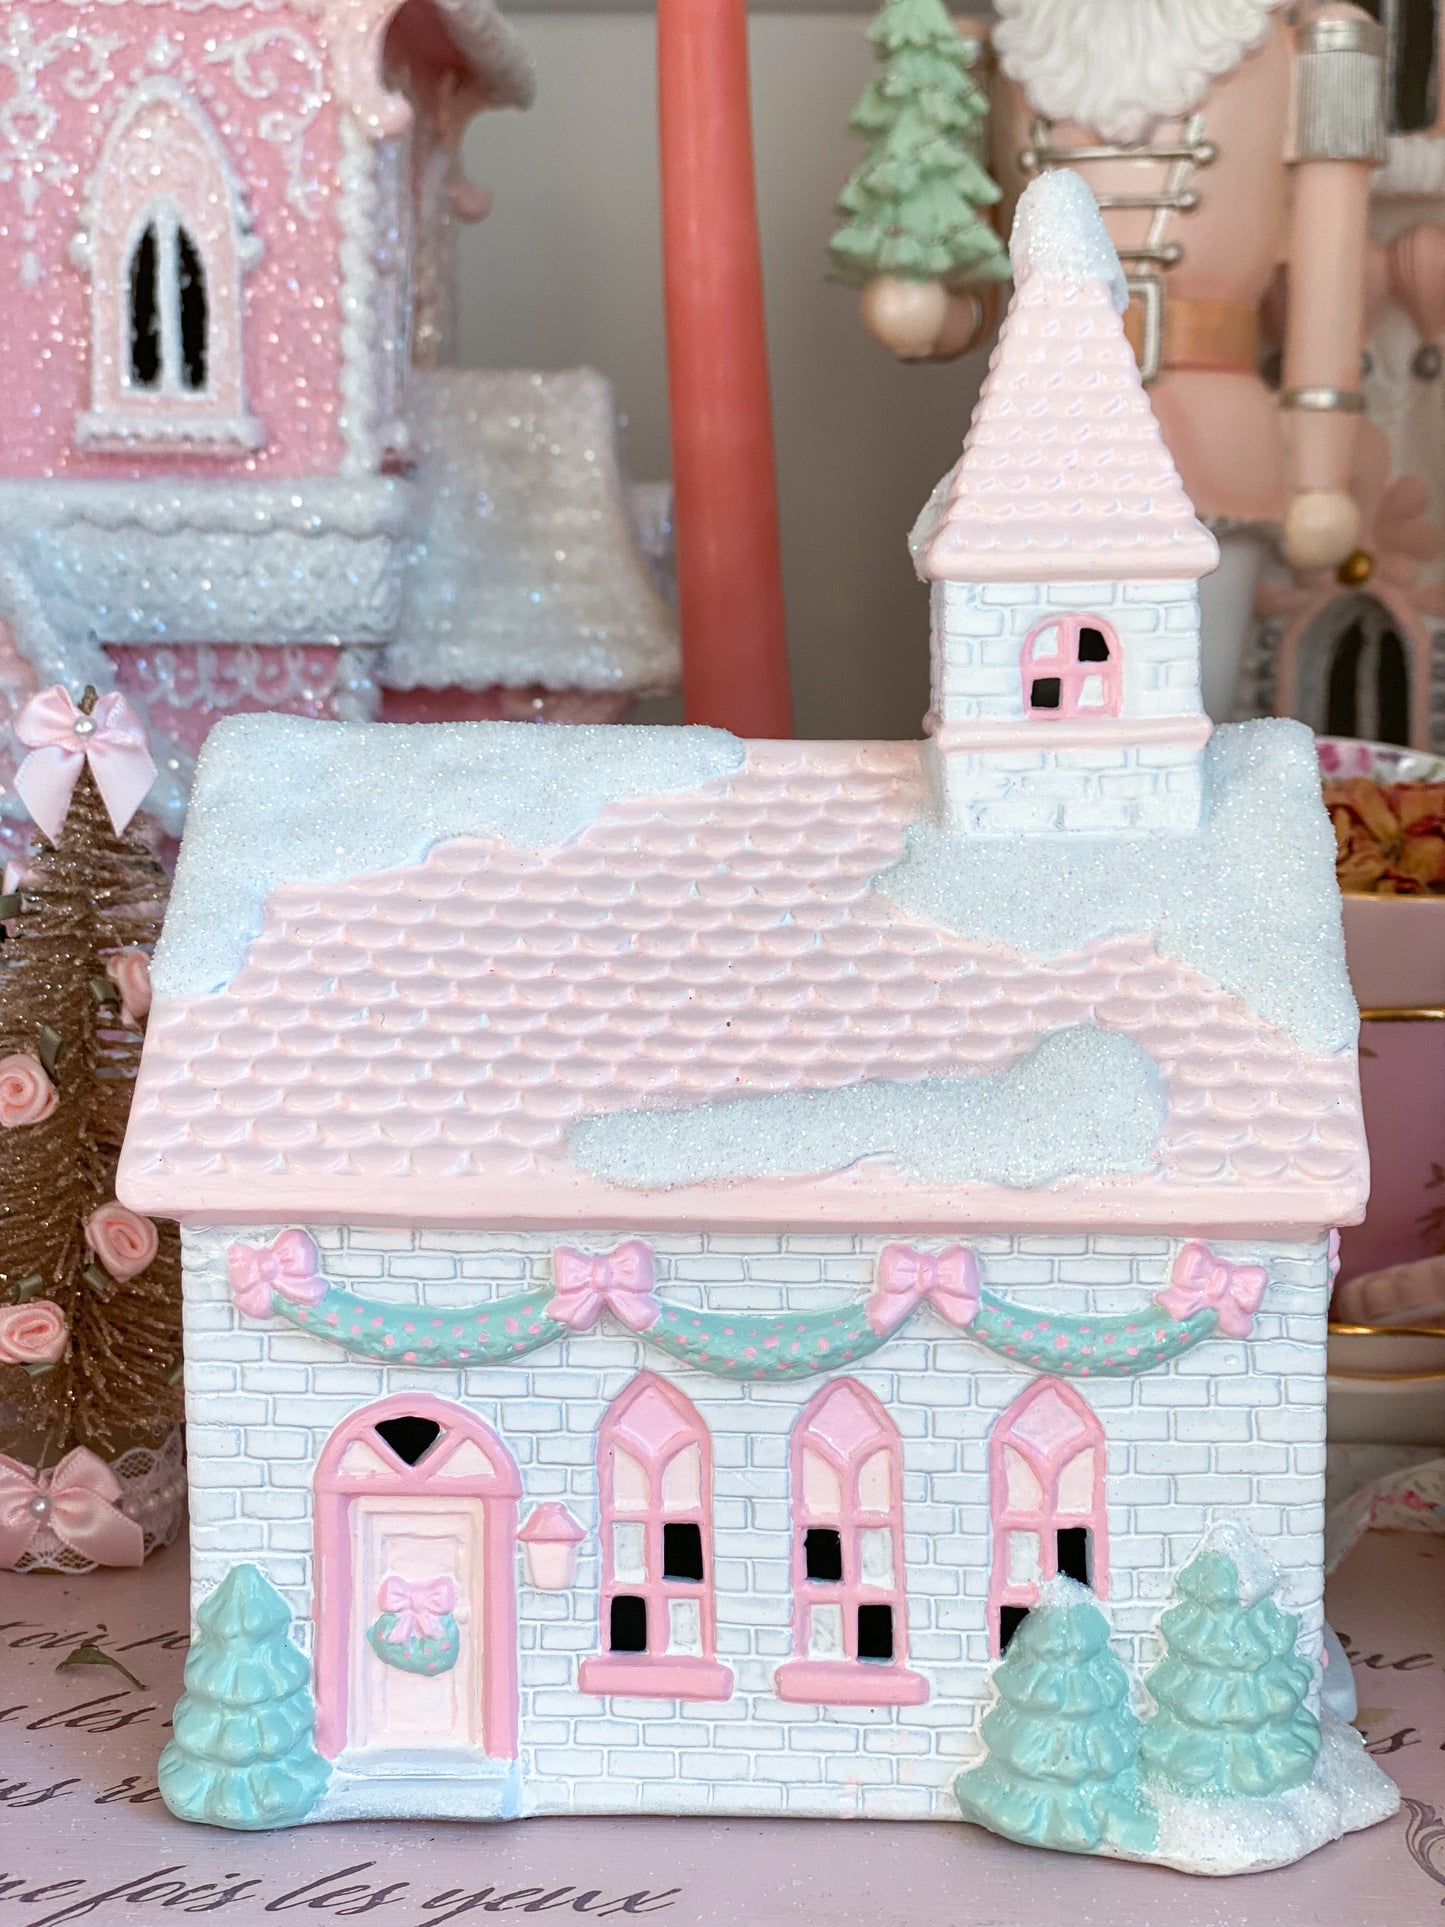 Bespoke Porcelain Pastel Pink and White Hand Painted Christmas Village Chapel